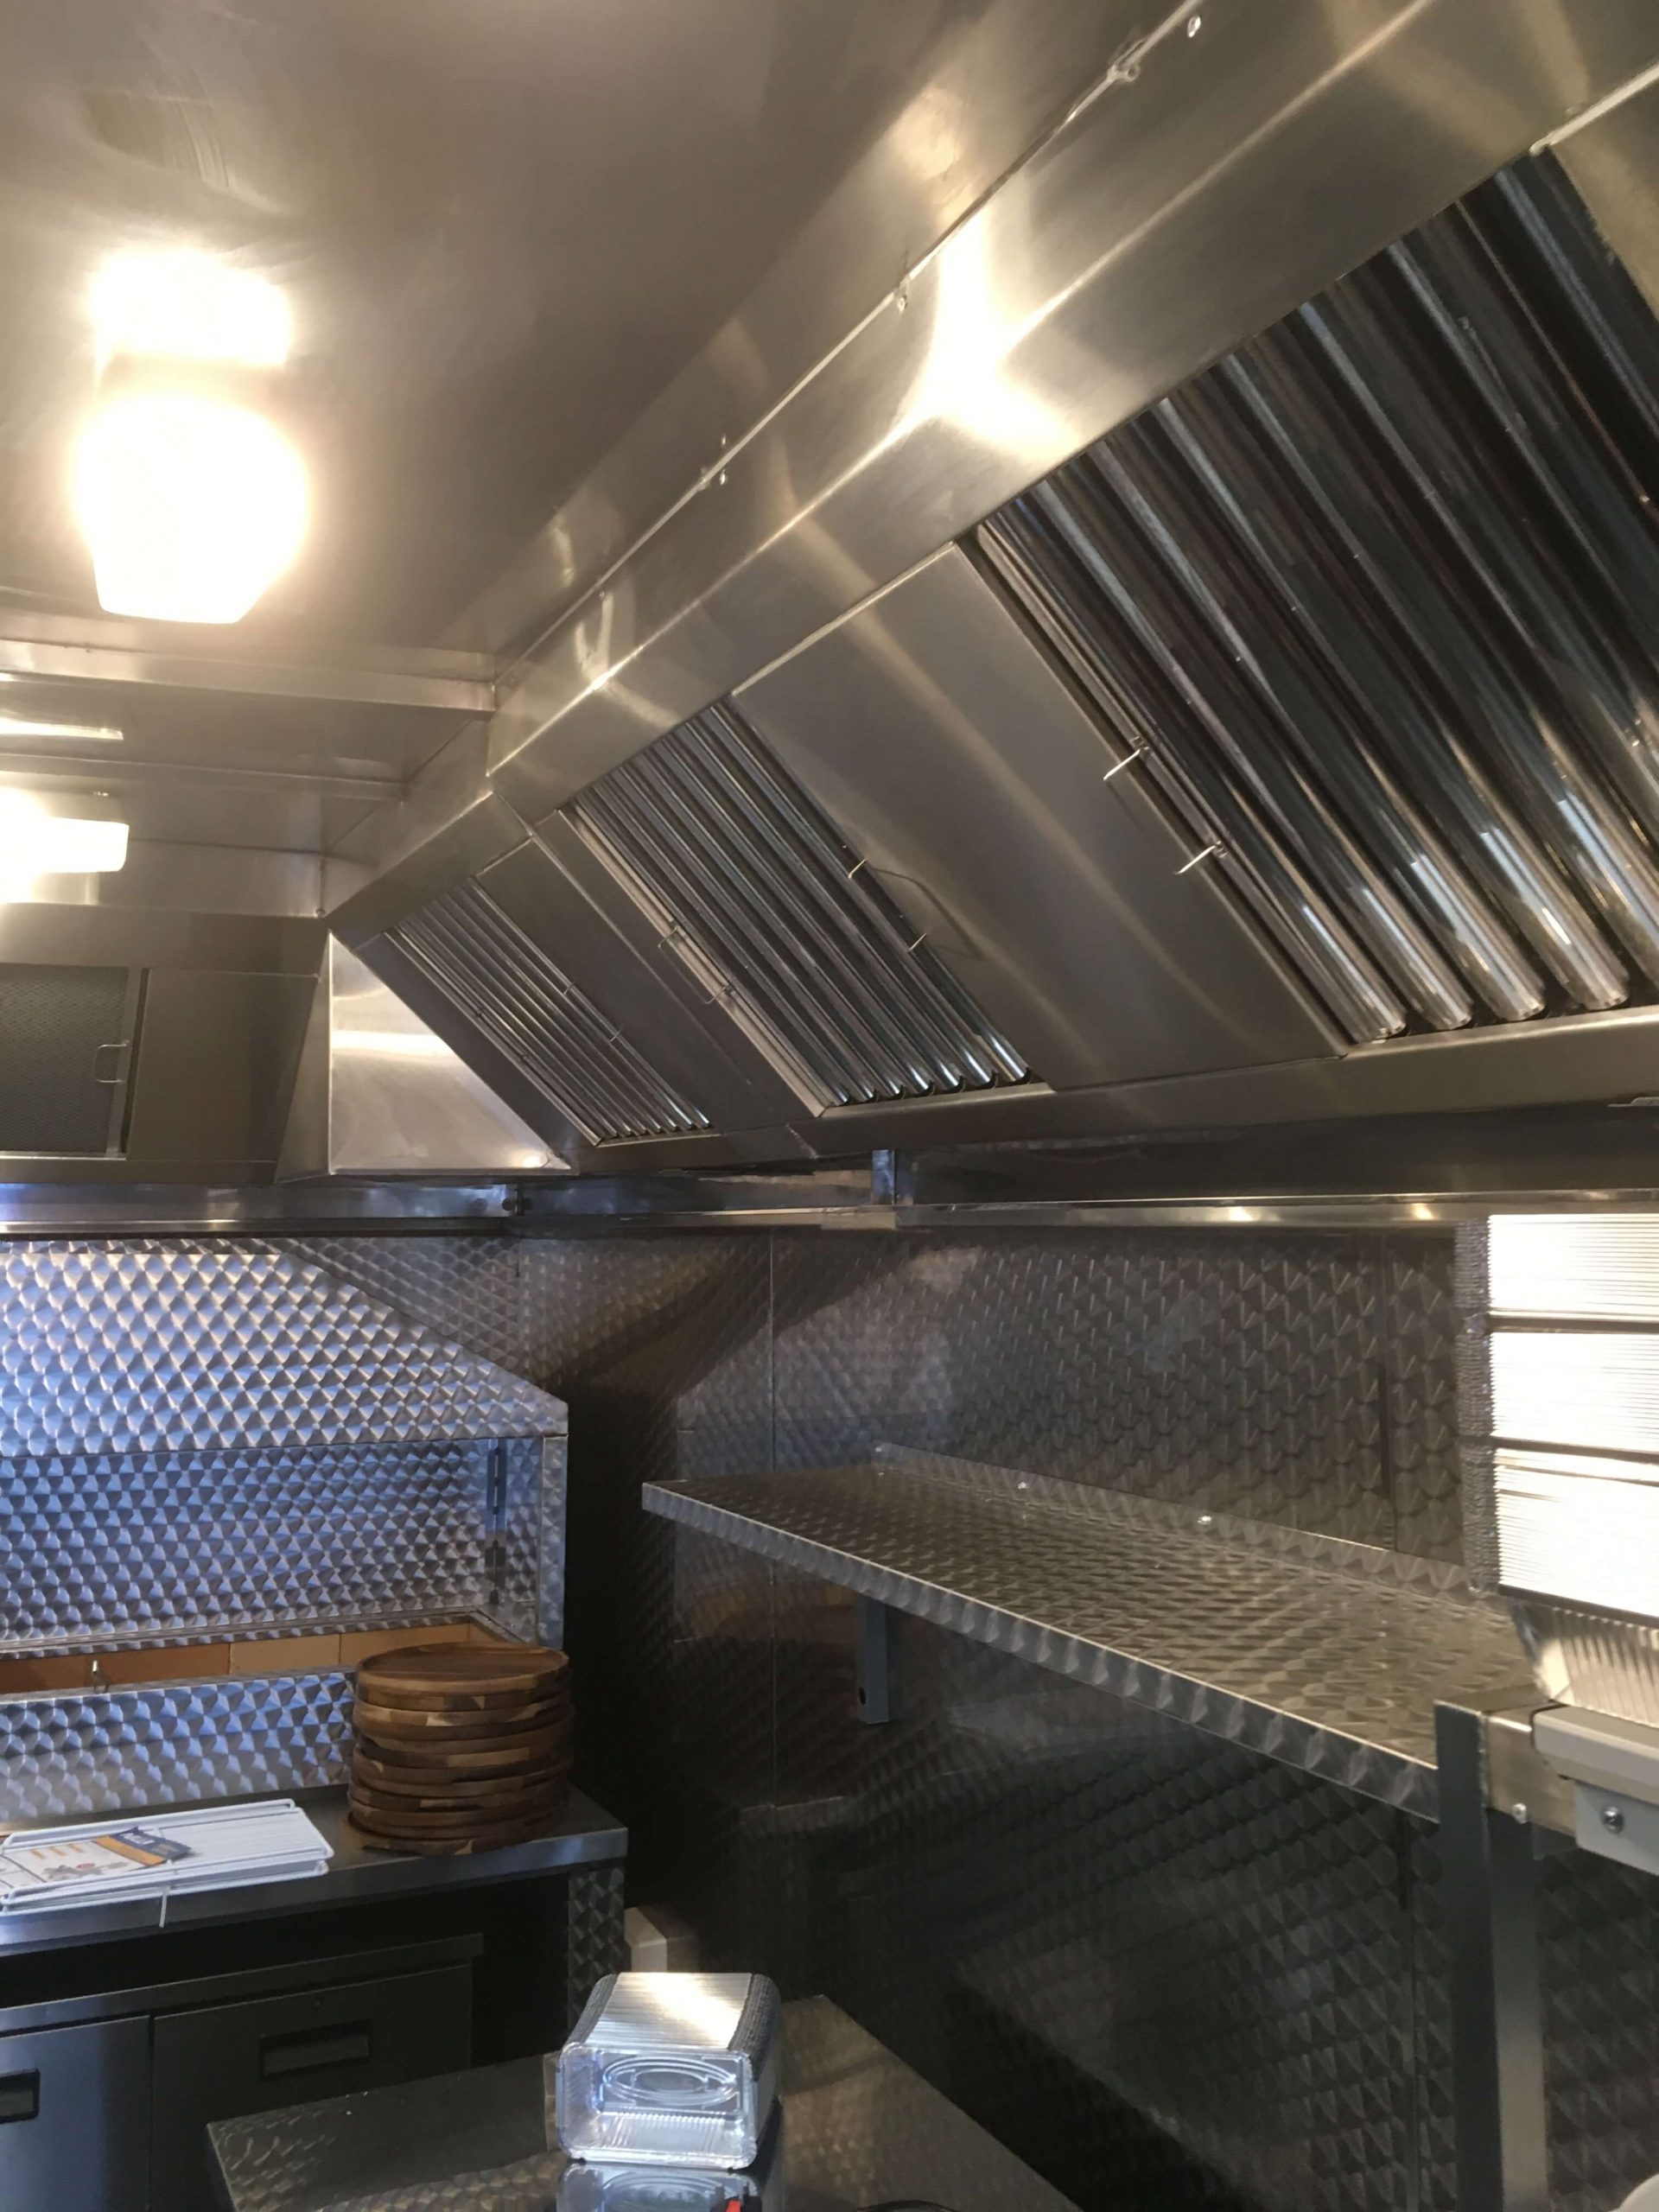 Stainless steel kitchen fabrications by Dolphin Fabrications